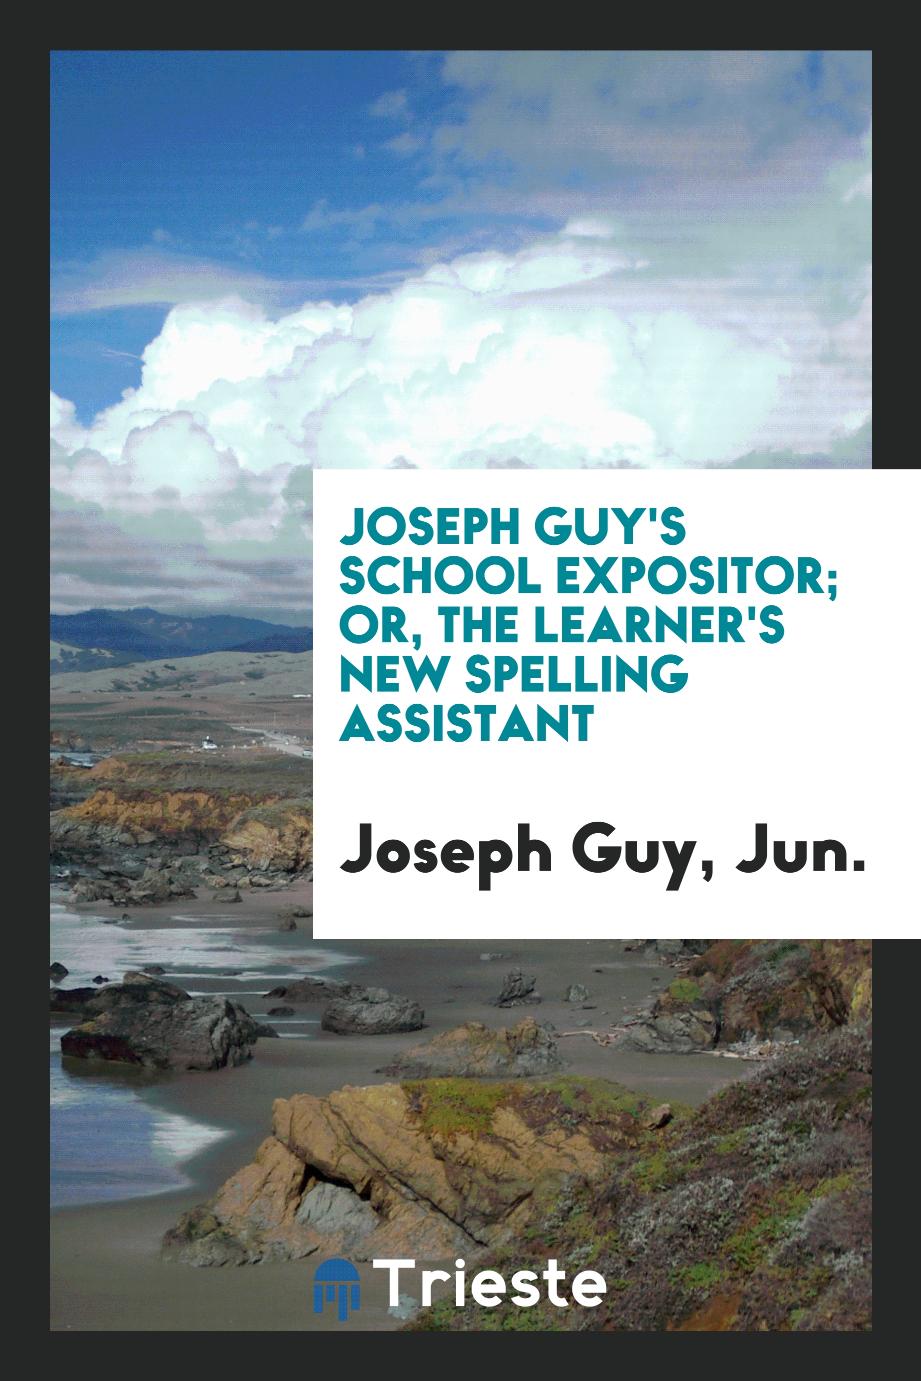 Joseph Guy's School Expositor; Or, the Learner's New Spelling Assistant